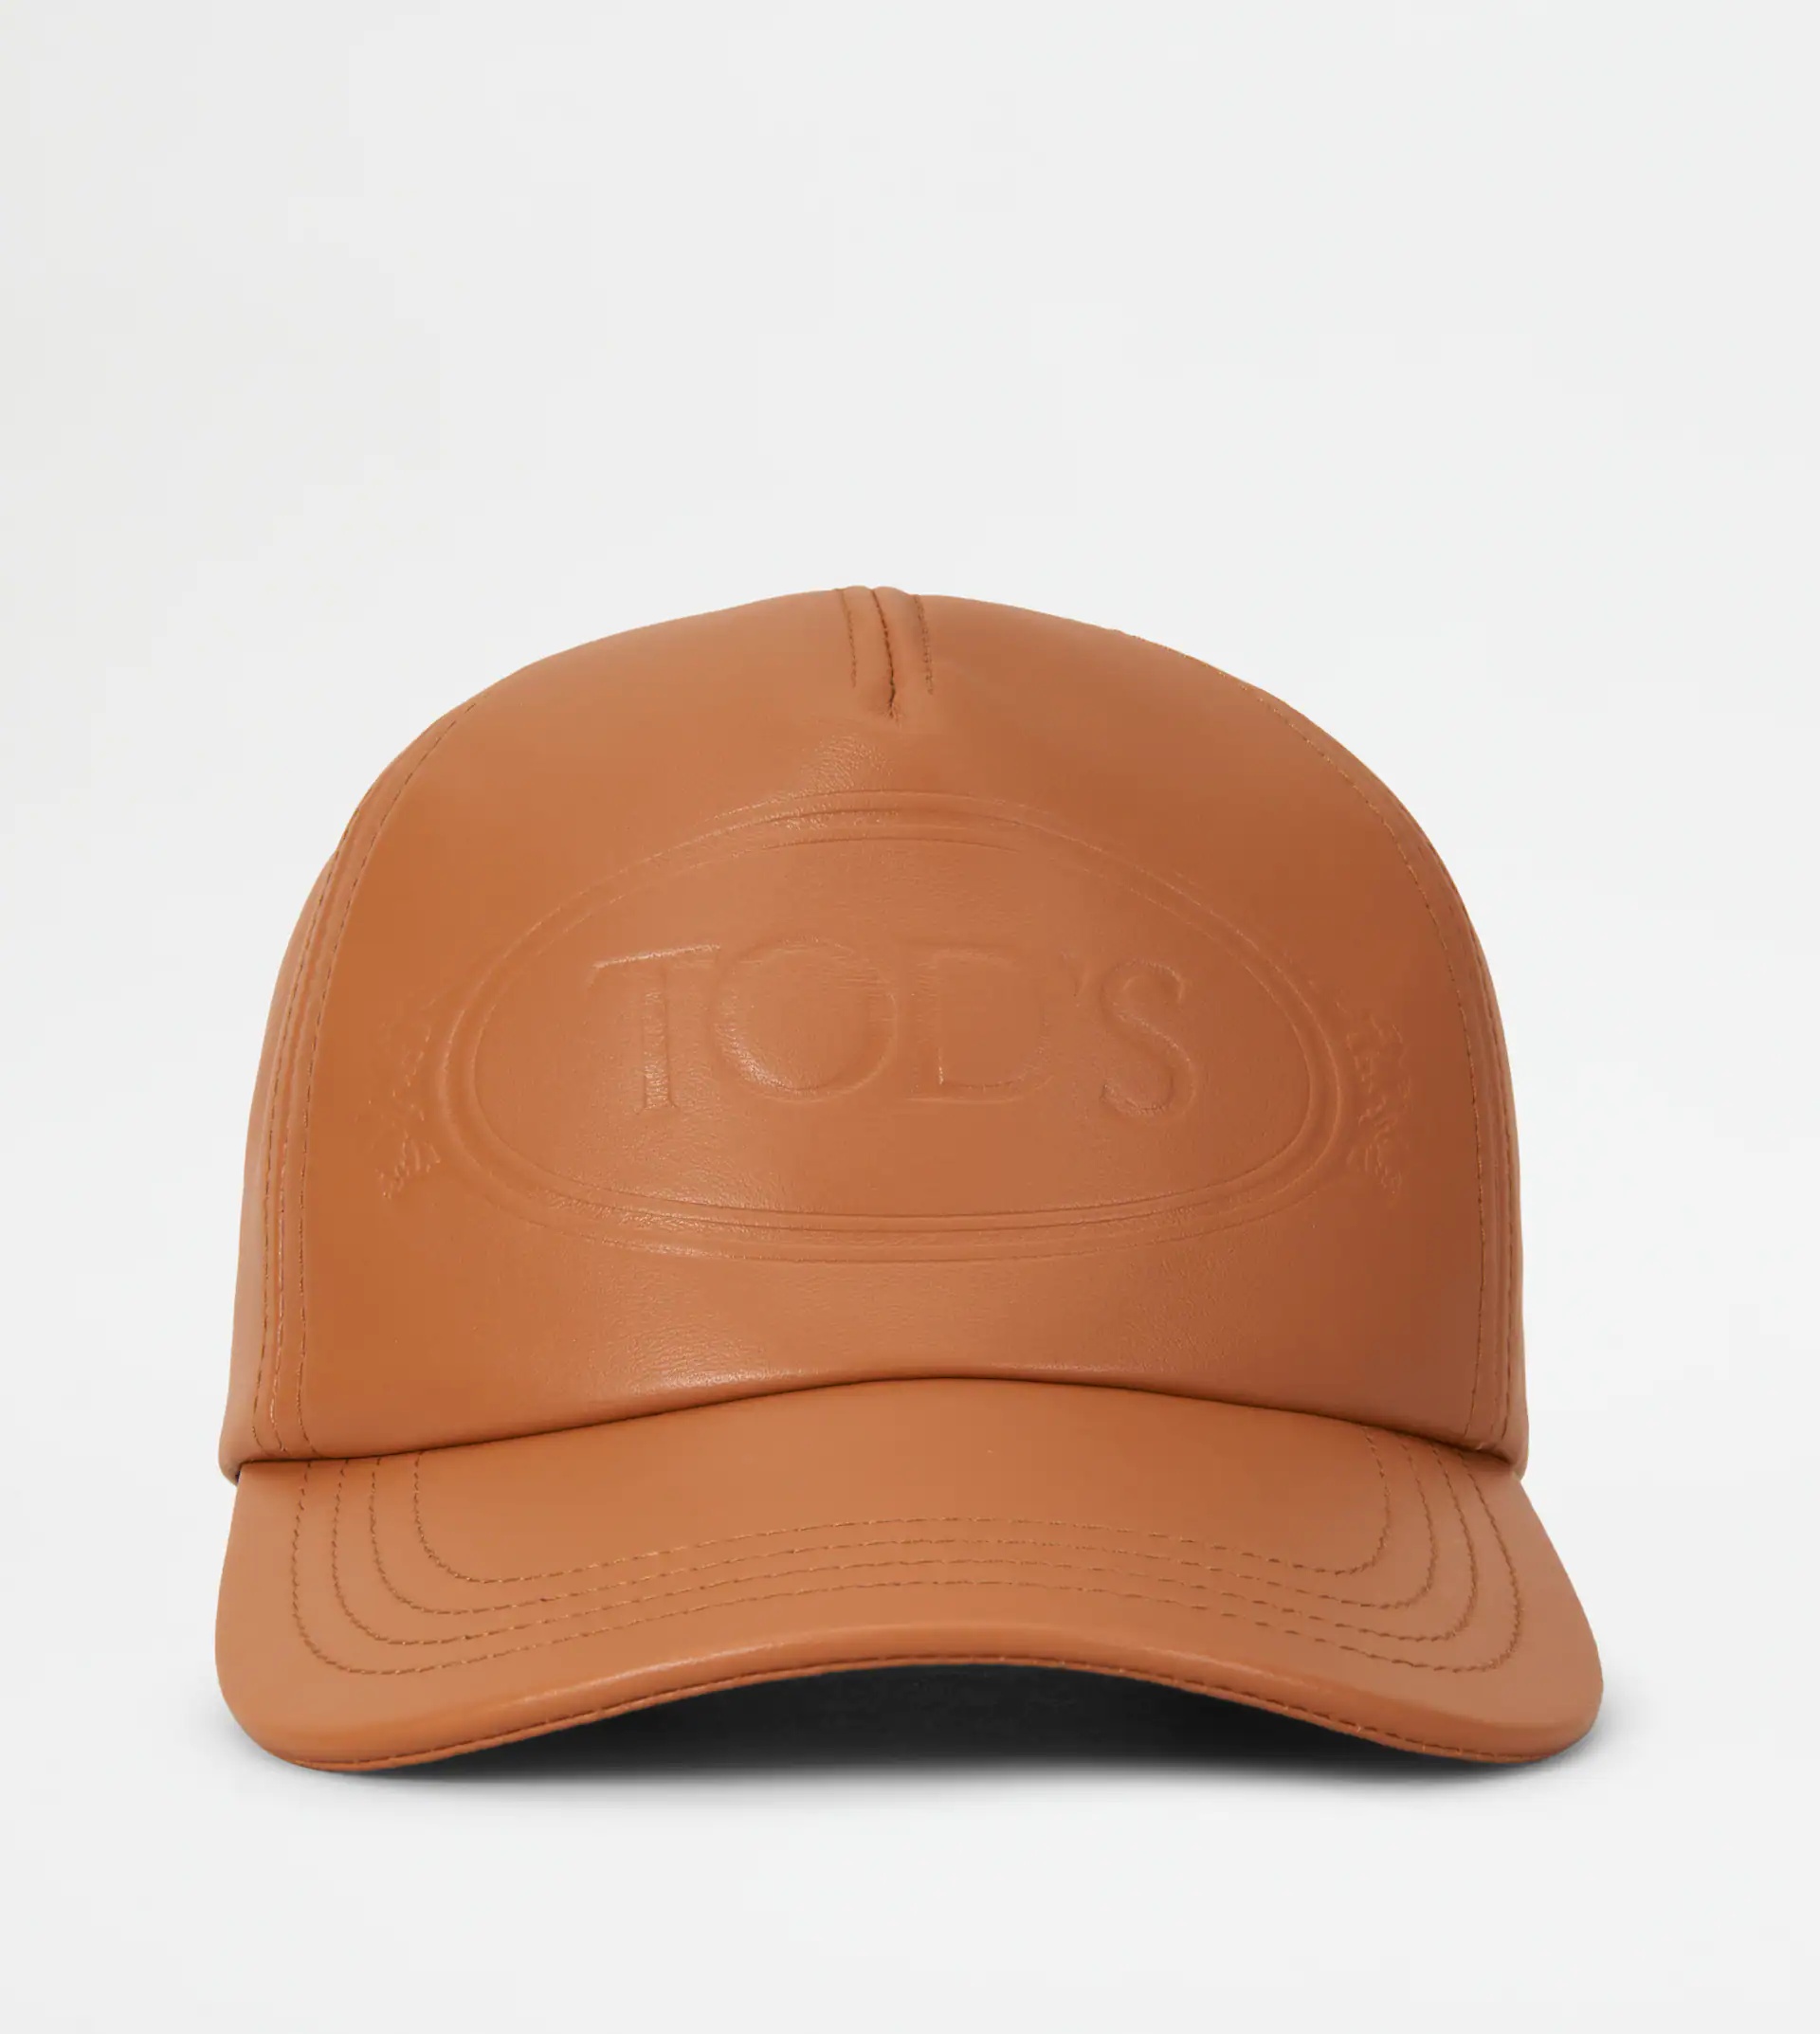 LEATHER CAP - BROWN - 1